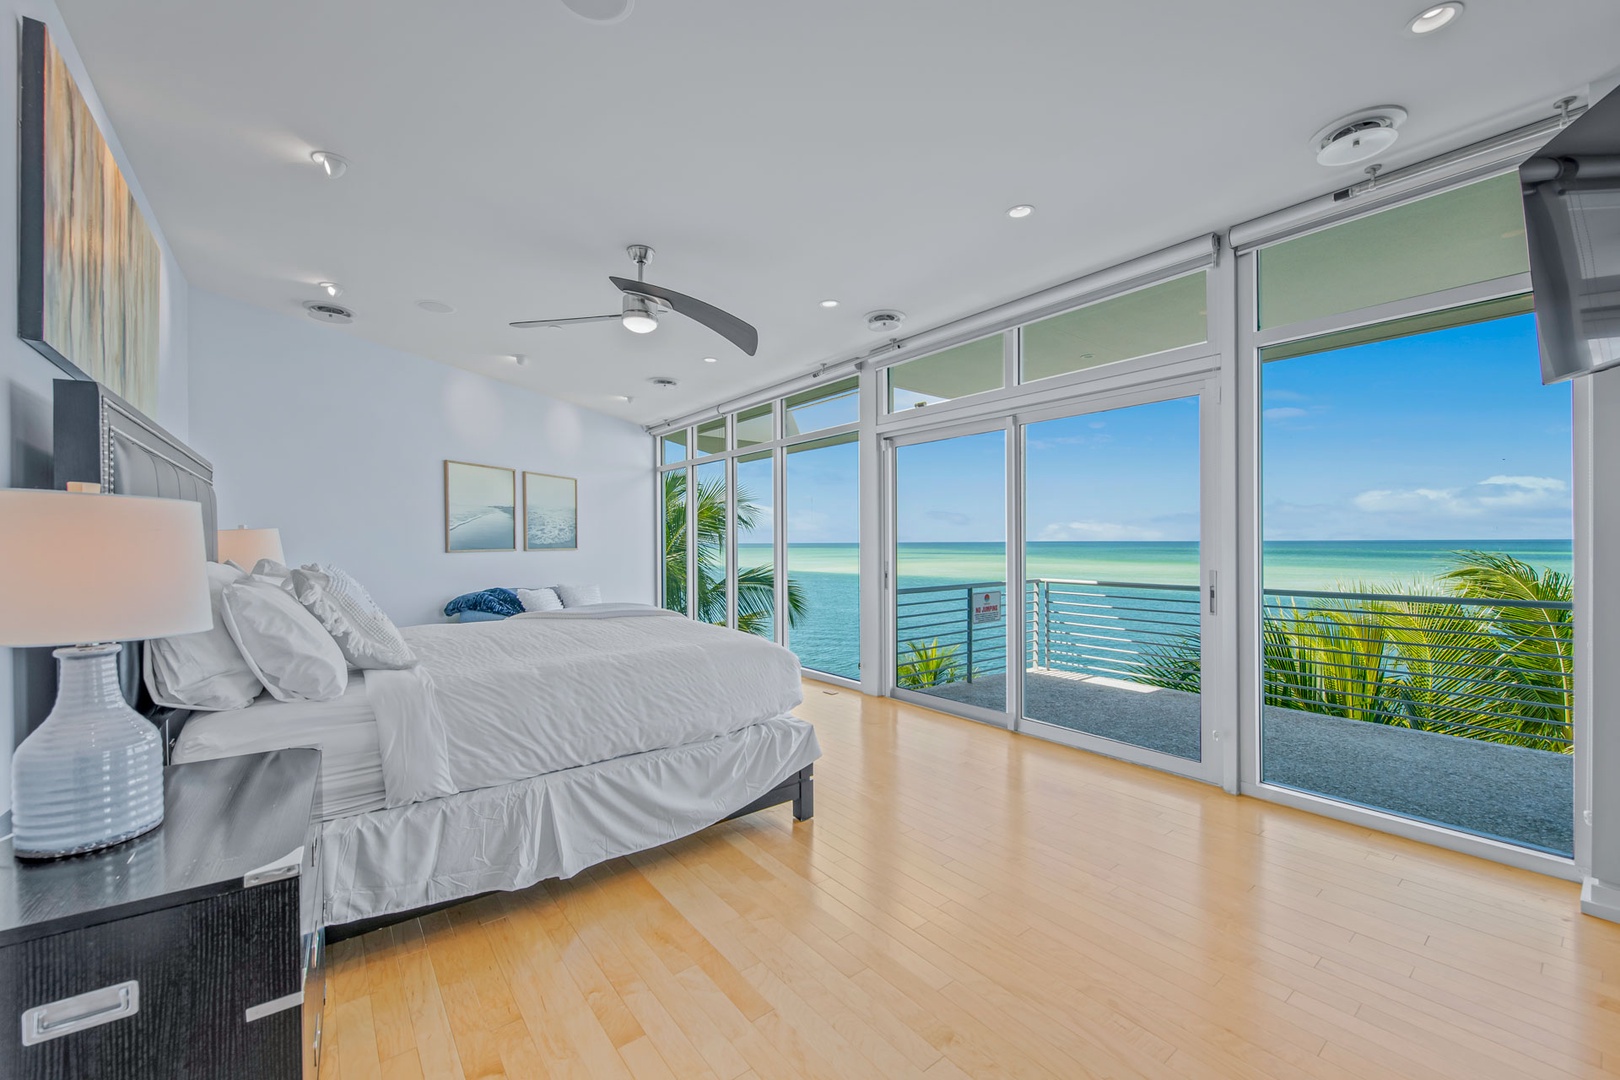 Master Bedroom - King Bed - Amazing Views + Private Balcony